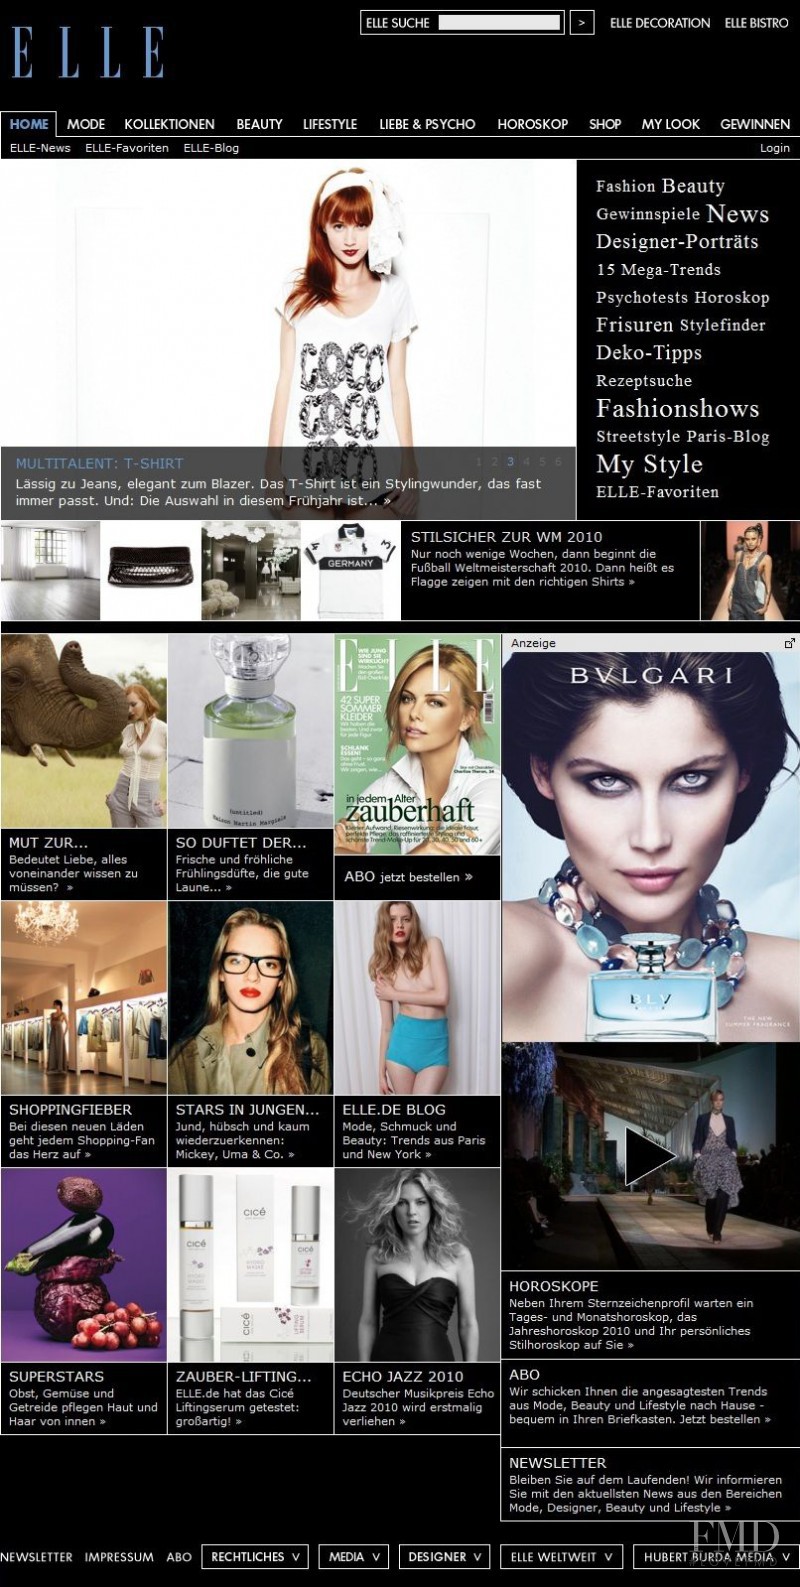  featured on the Elle.de screen from April 2010